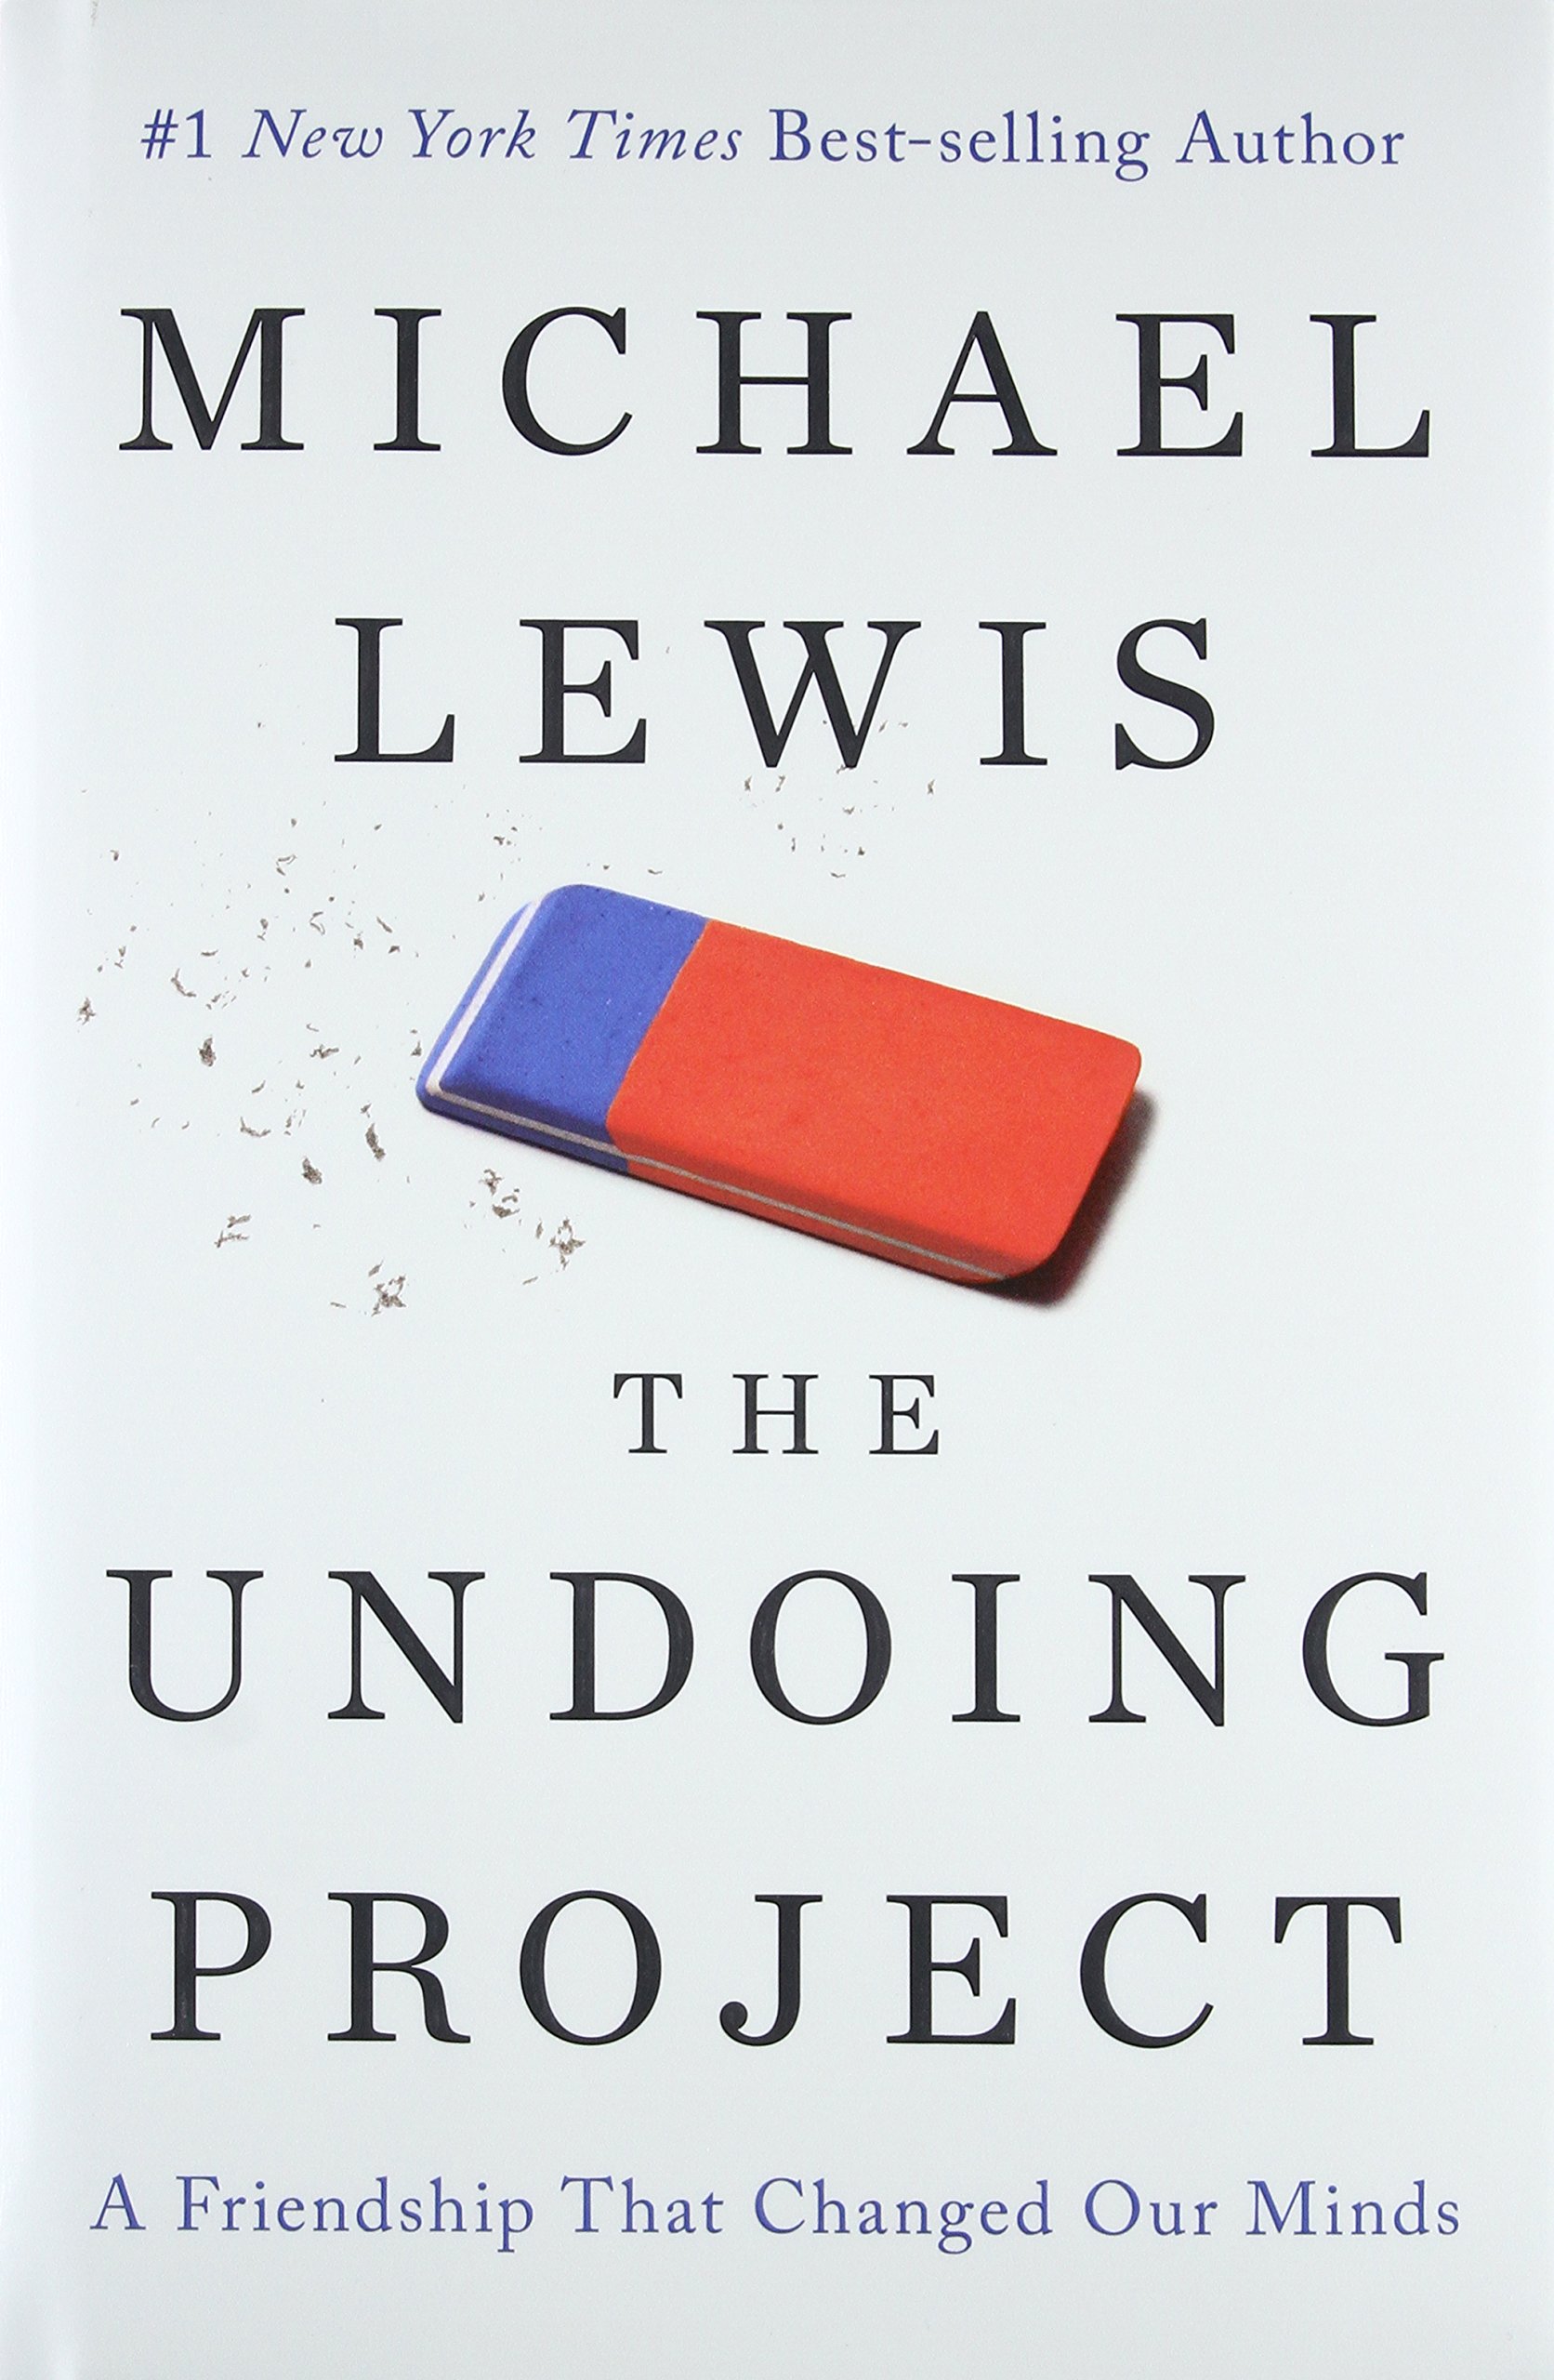 The Undoing Project cover, gray background and image of blue and red eraser.